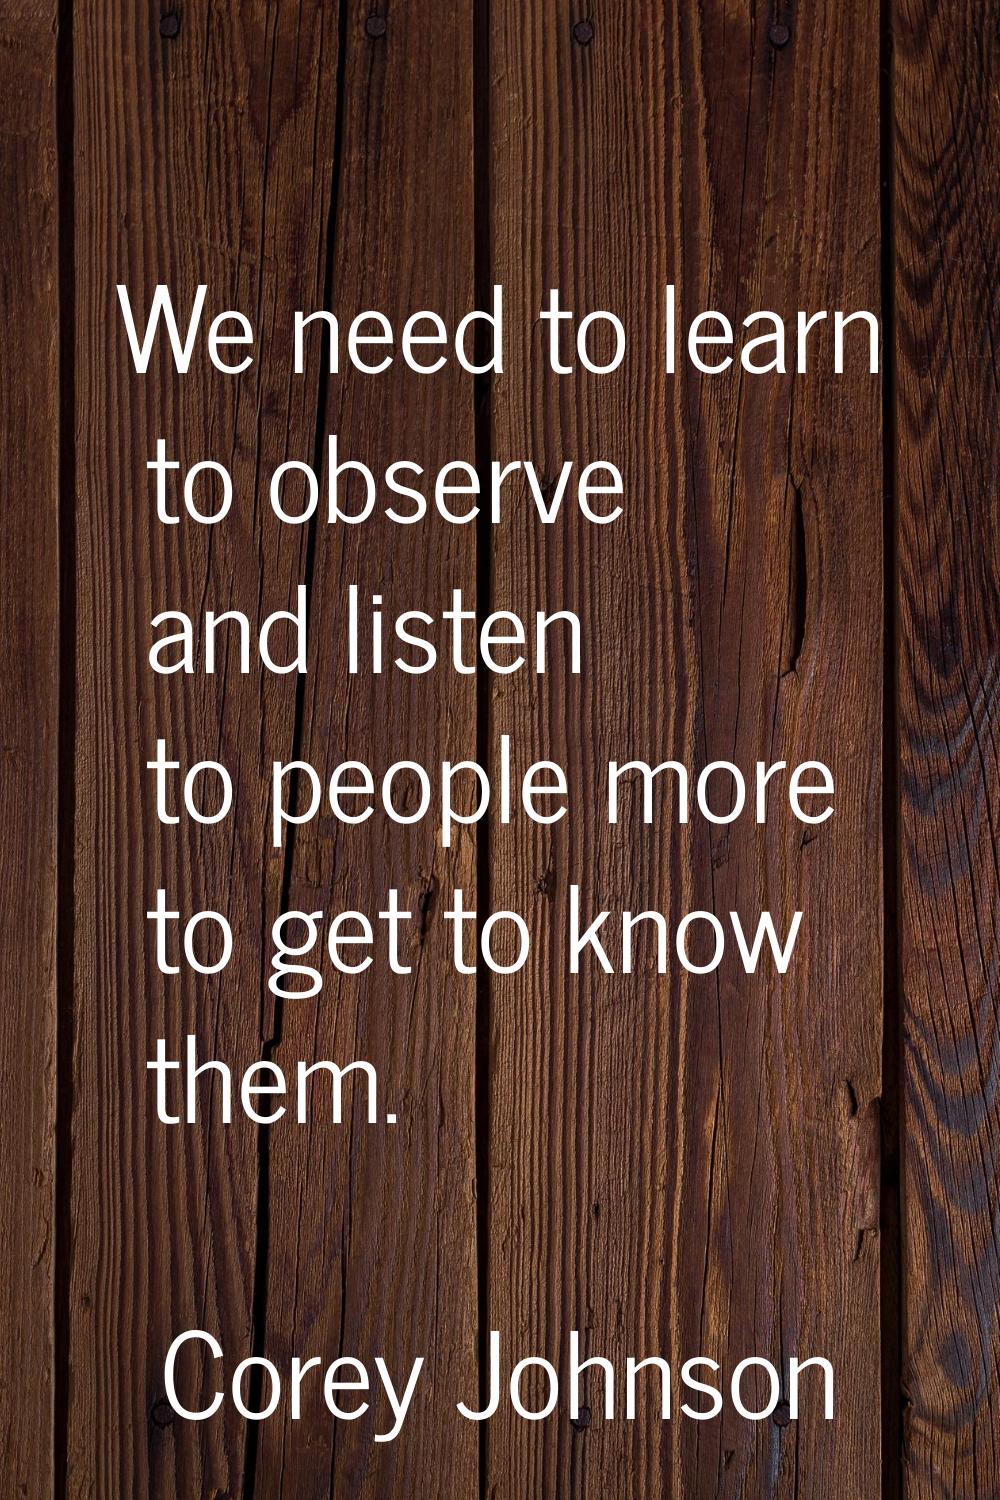 We need to learn to observe and listen to people more to get to know them.